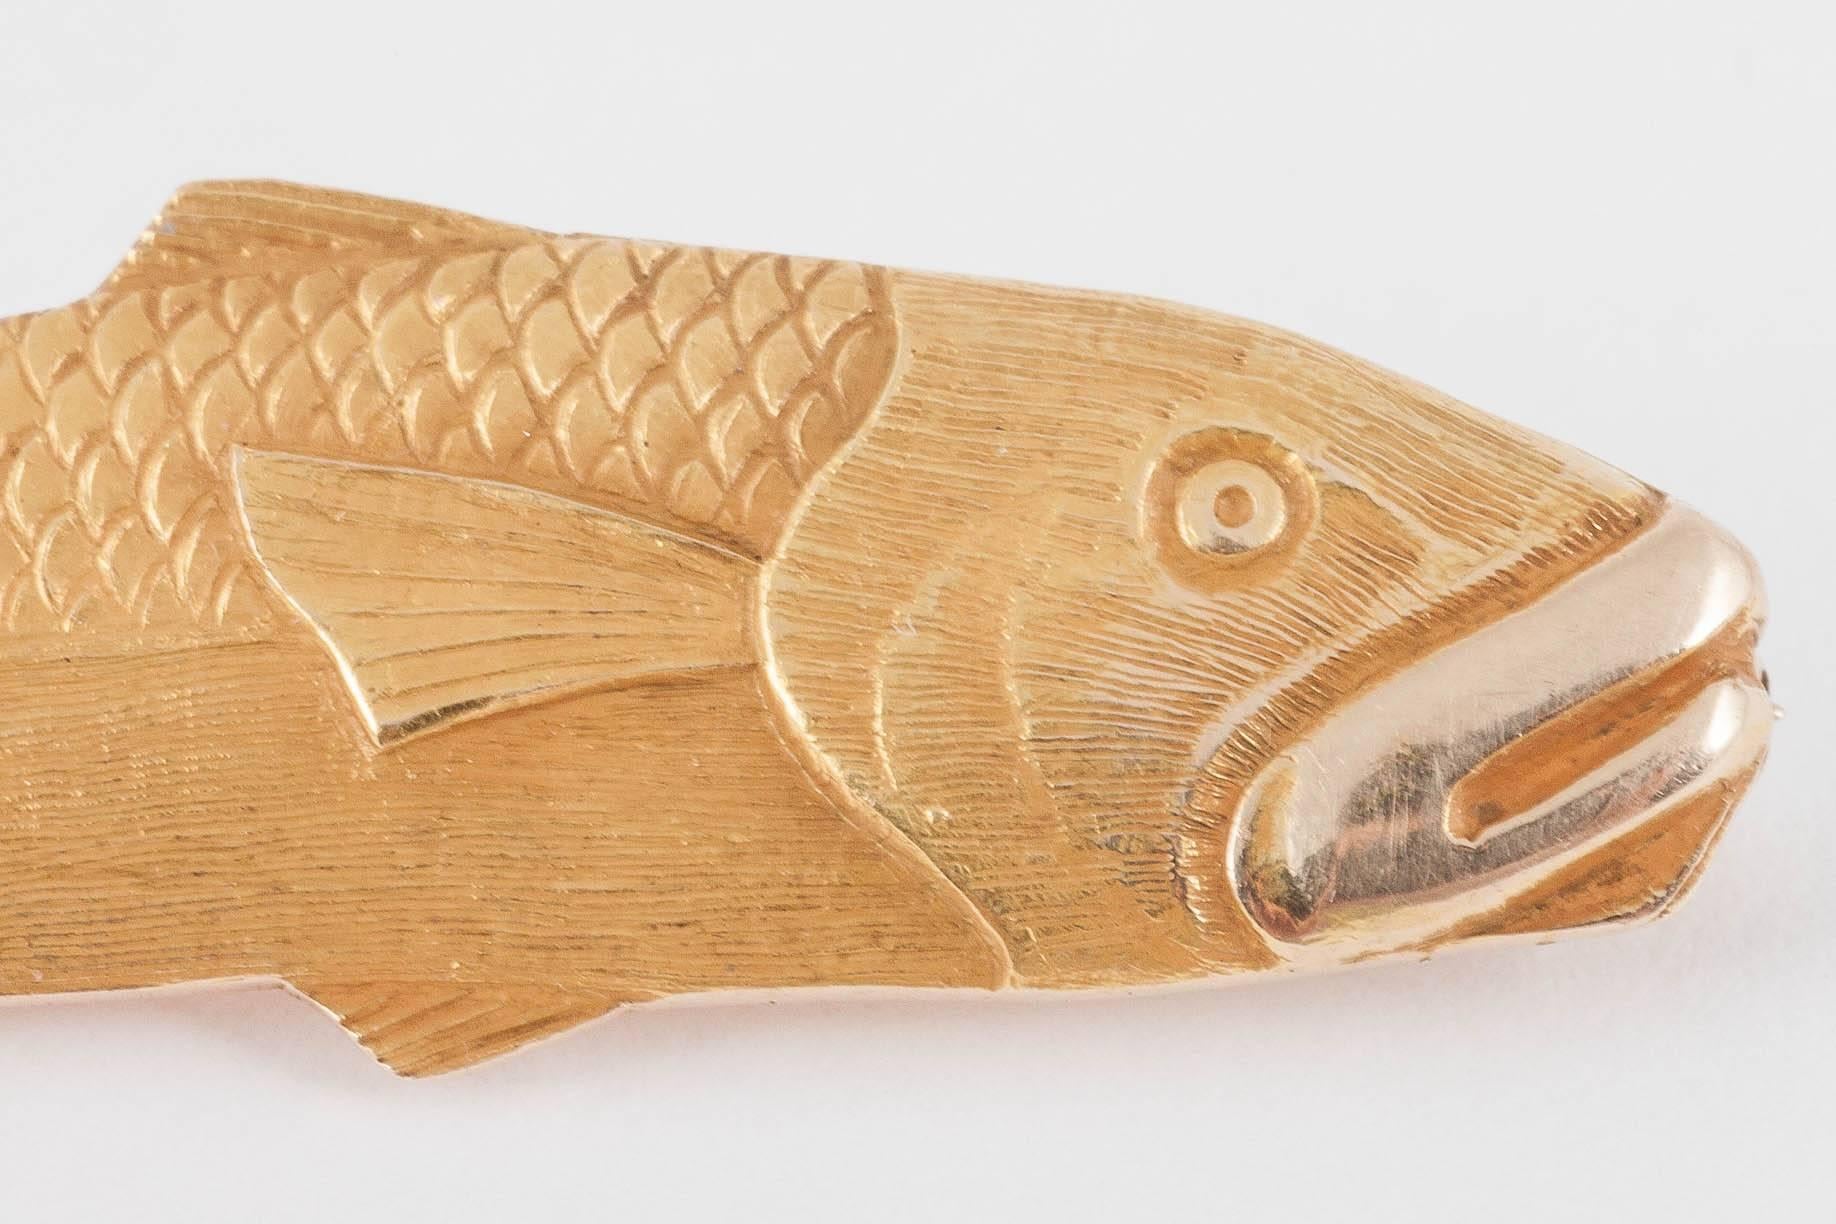 A finely chased 14 karat yellow gold antique brooch in the design of a cod fish. The fish scales are particularly well defined and it has an excellent patina. The brooch pin has a safety catch.  Stamped 14k, numbered 898 and signed B.B&B for Bailey,